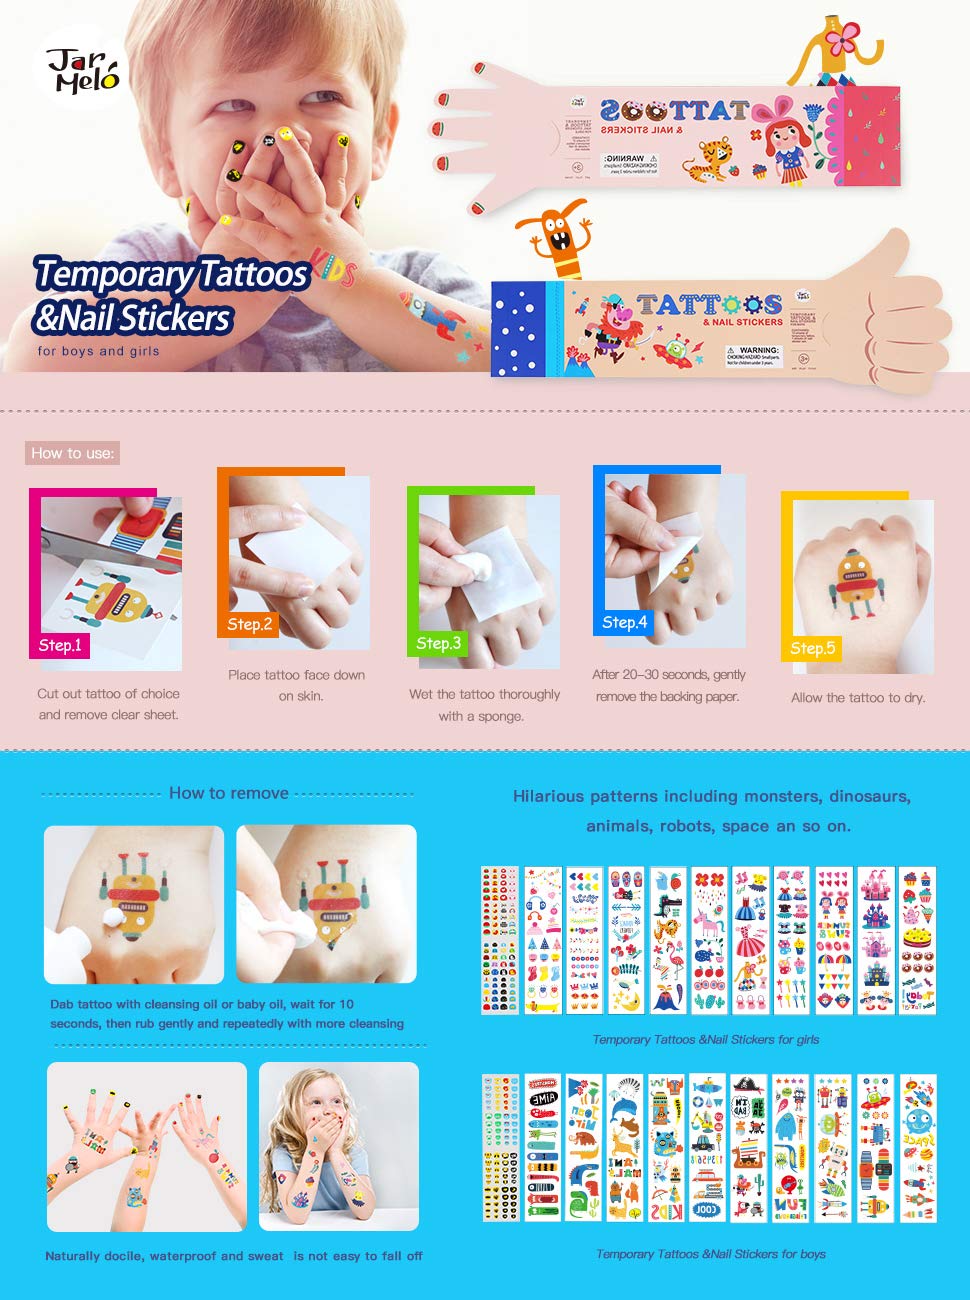 Joan Miro Tattoo & Nail Stickers for Boys and girls children safety tattoo body stickers